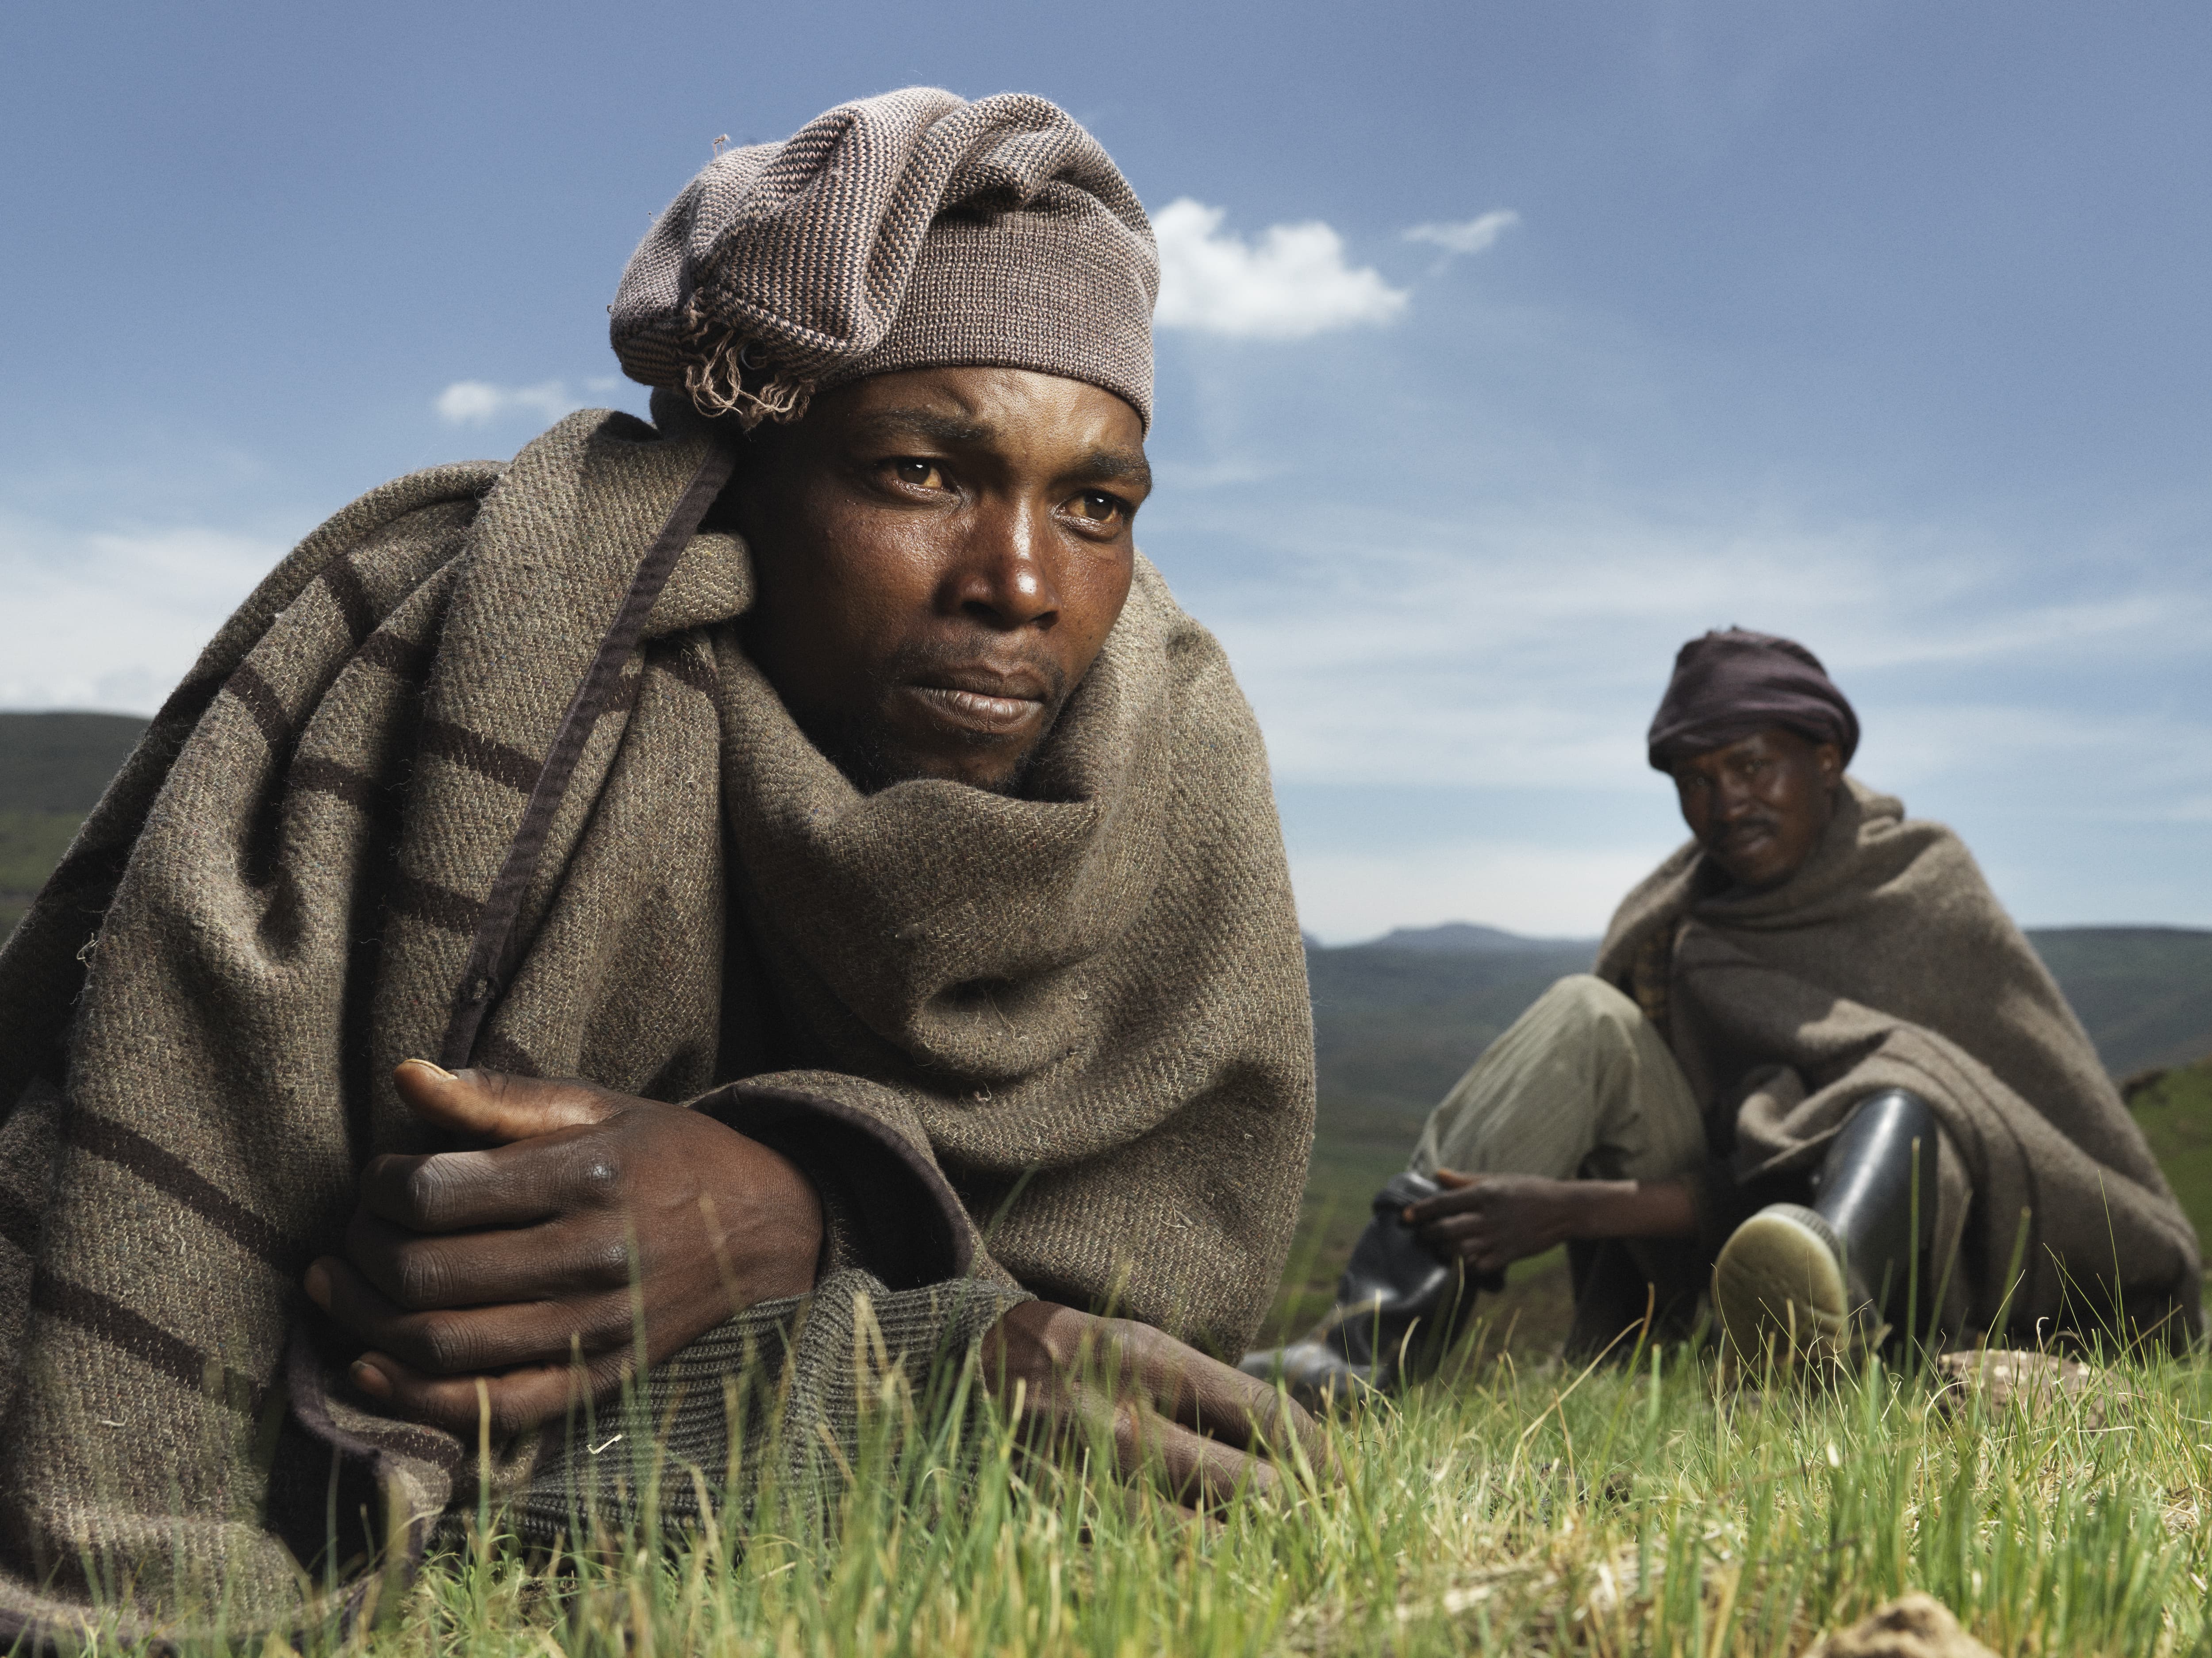 The Herder Boys of Lesotho by Tom Oldham. The exhibition supported by Hasselblad and Metro Imaging, takes place at The White Space in Great Newport Street from 26th June 2017